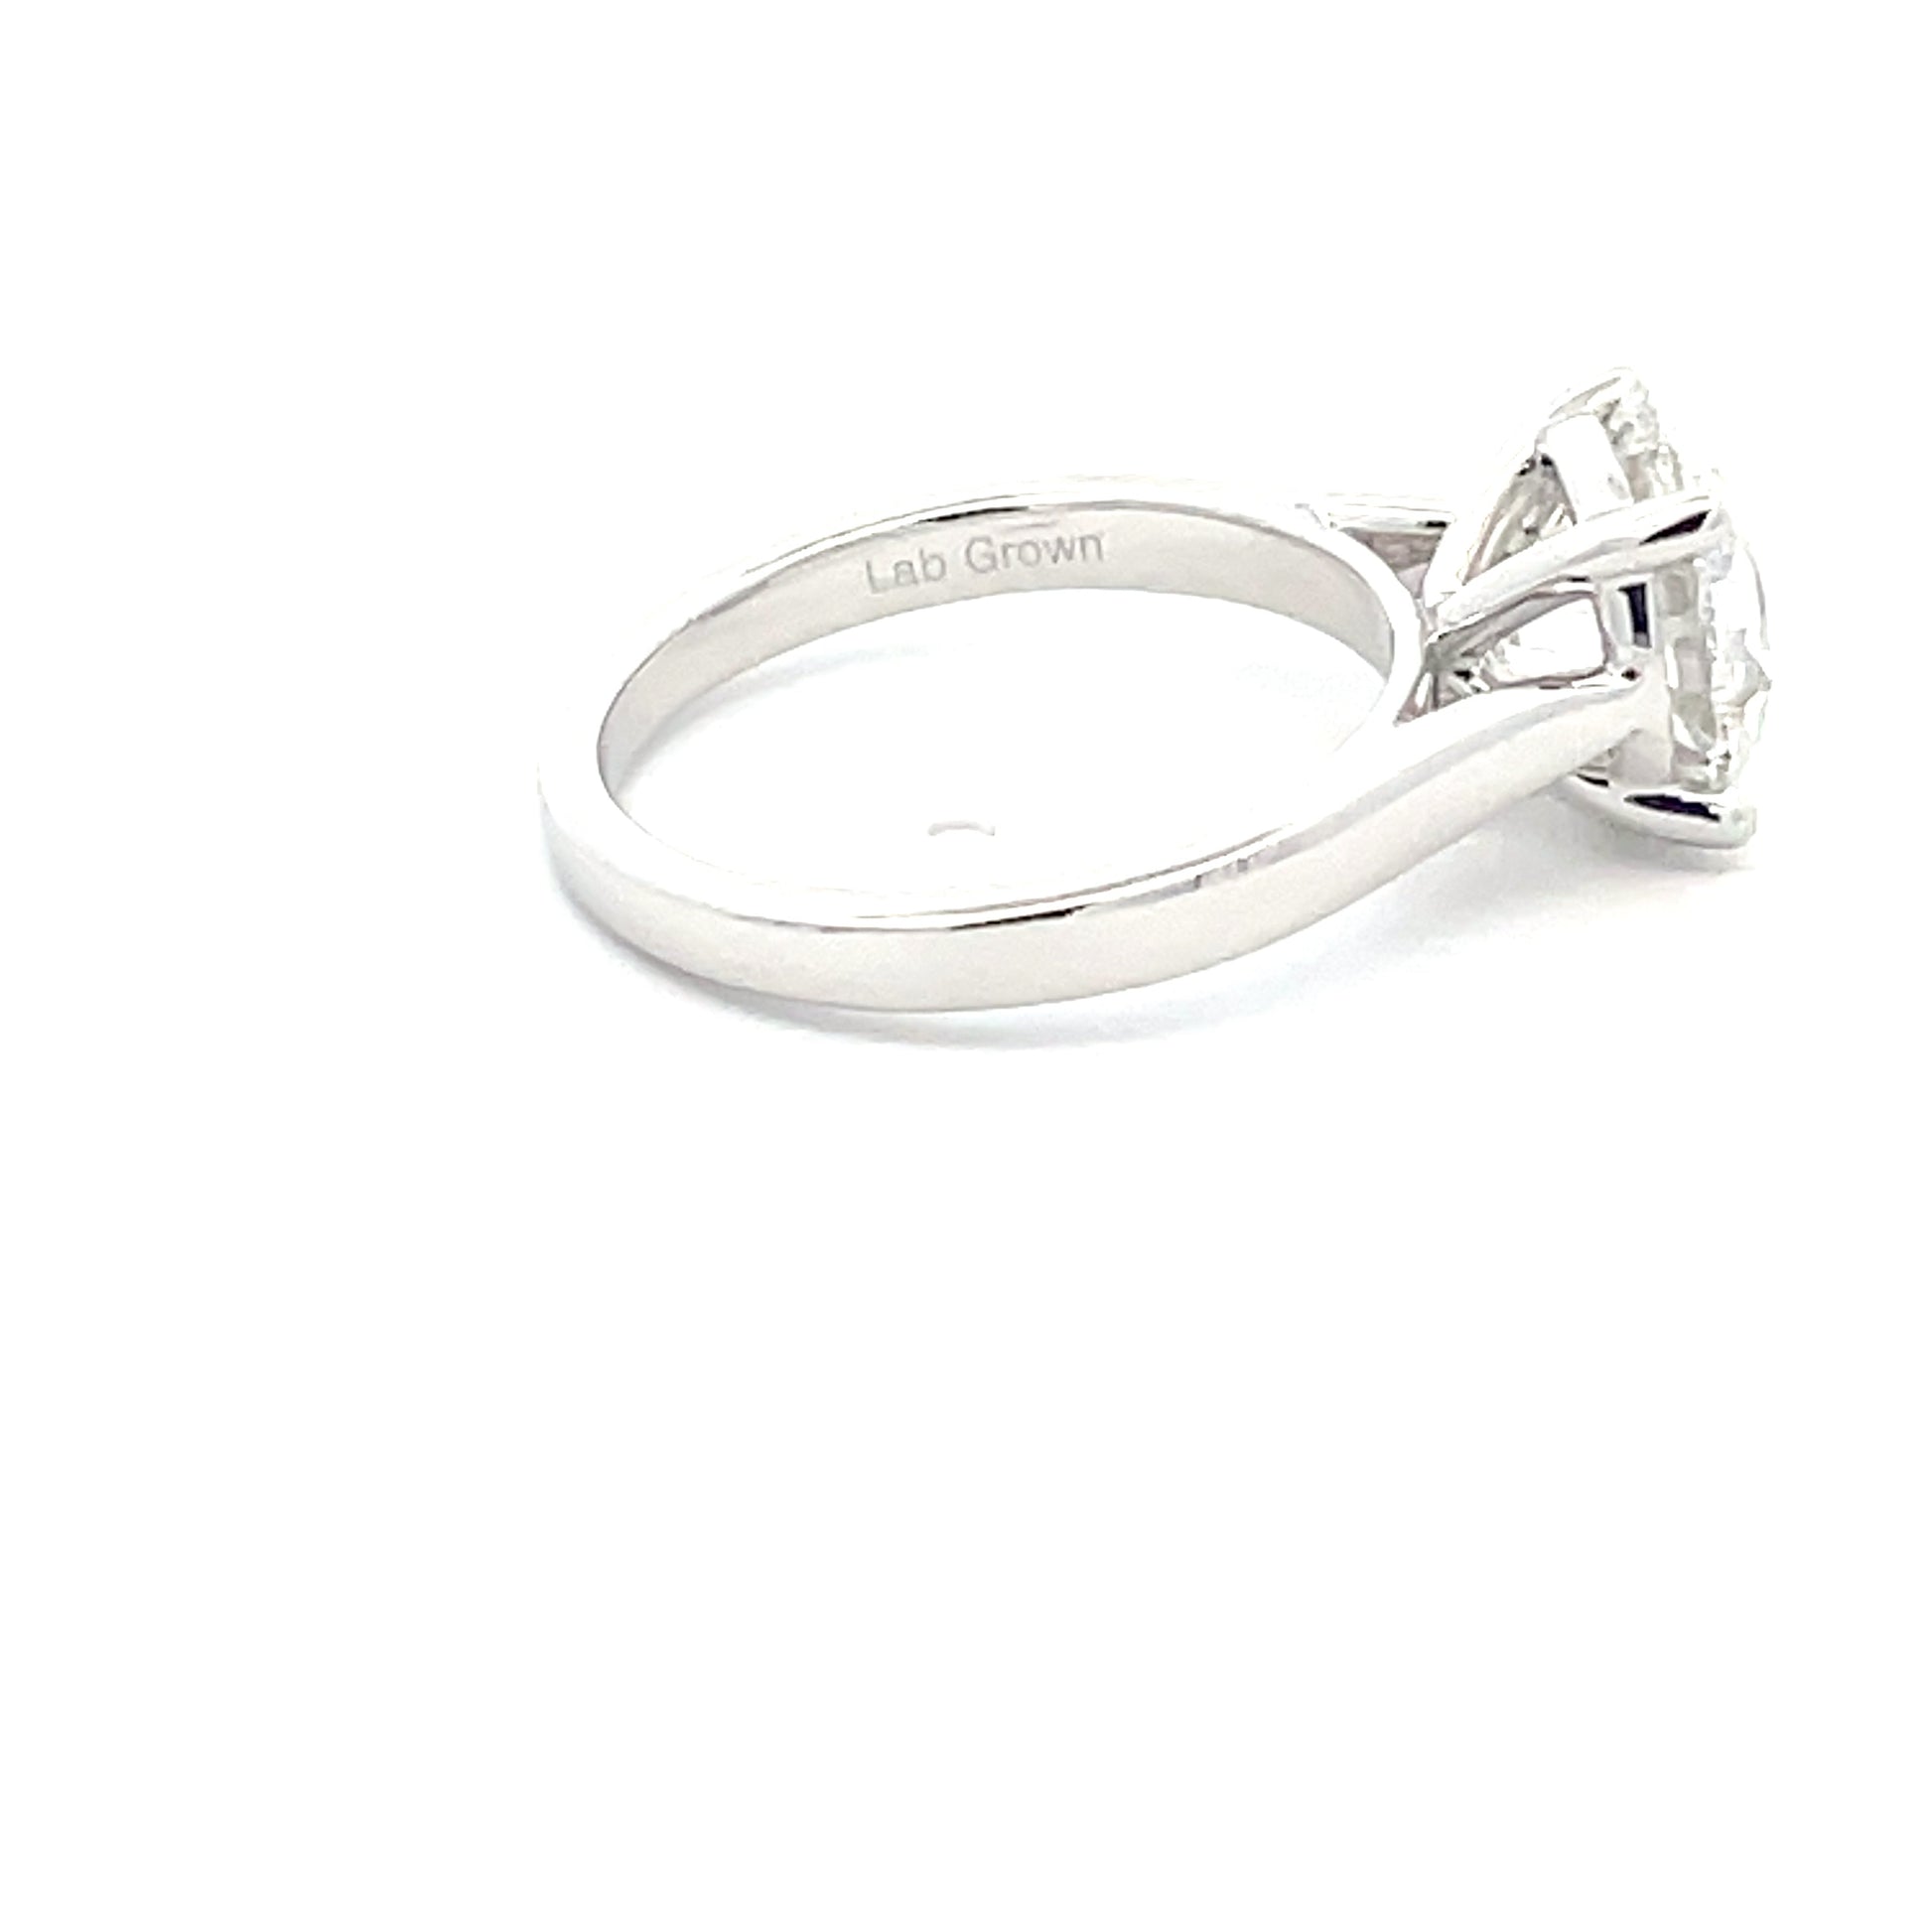 Lab Grown Round Brilliant Cut Diamond Solitaire Ring - 2.73cts  Gardiner Brothers   